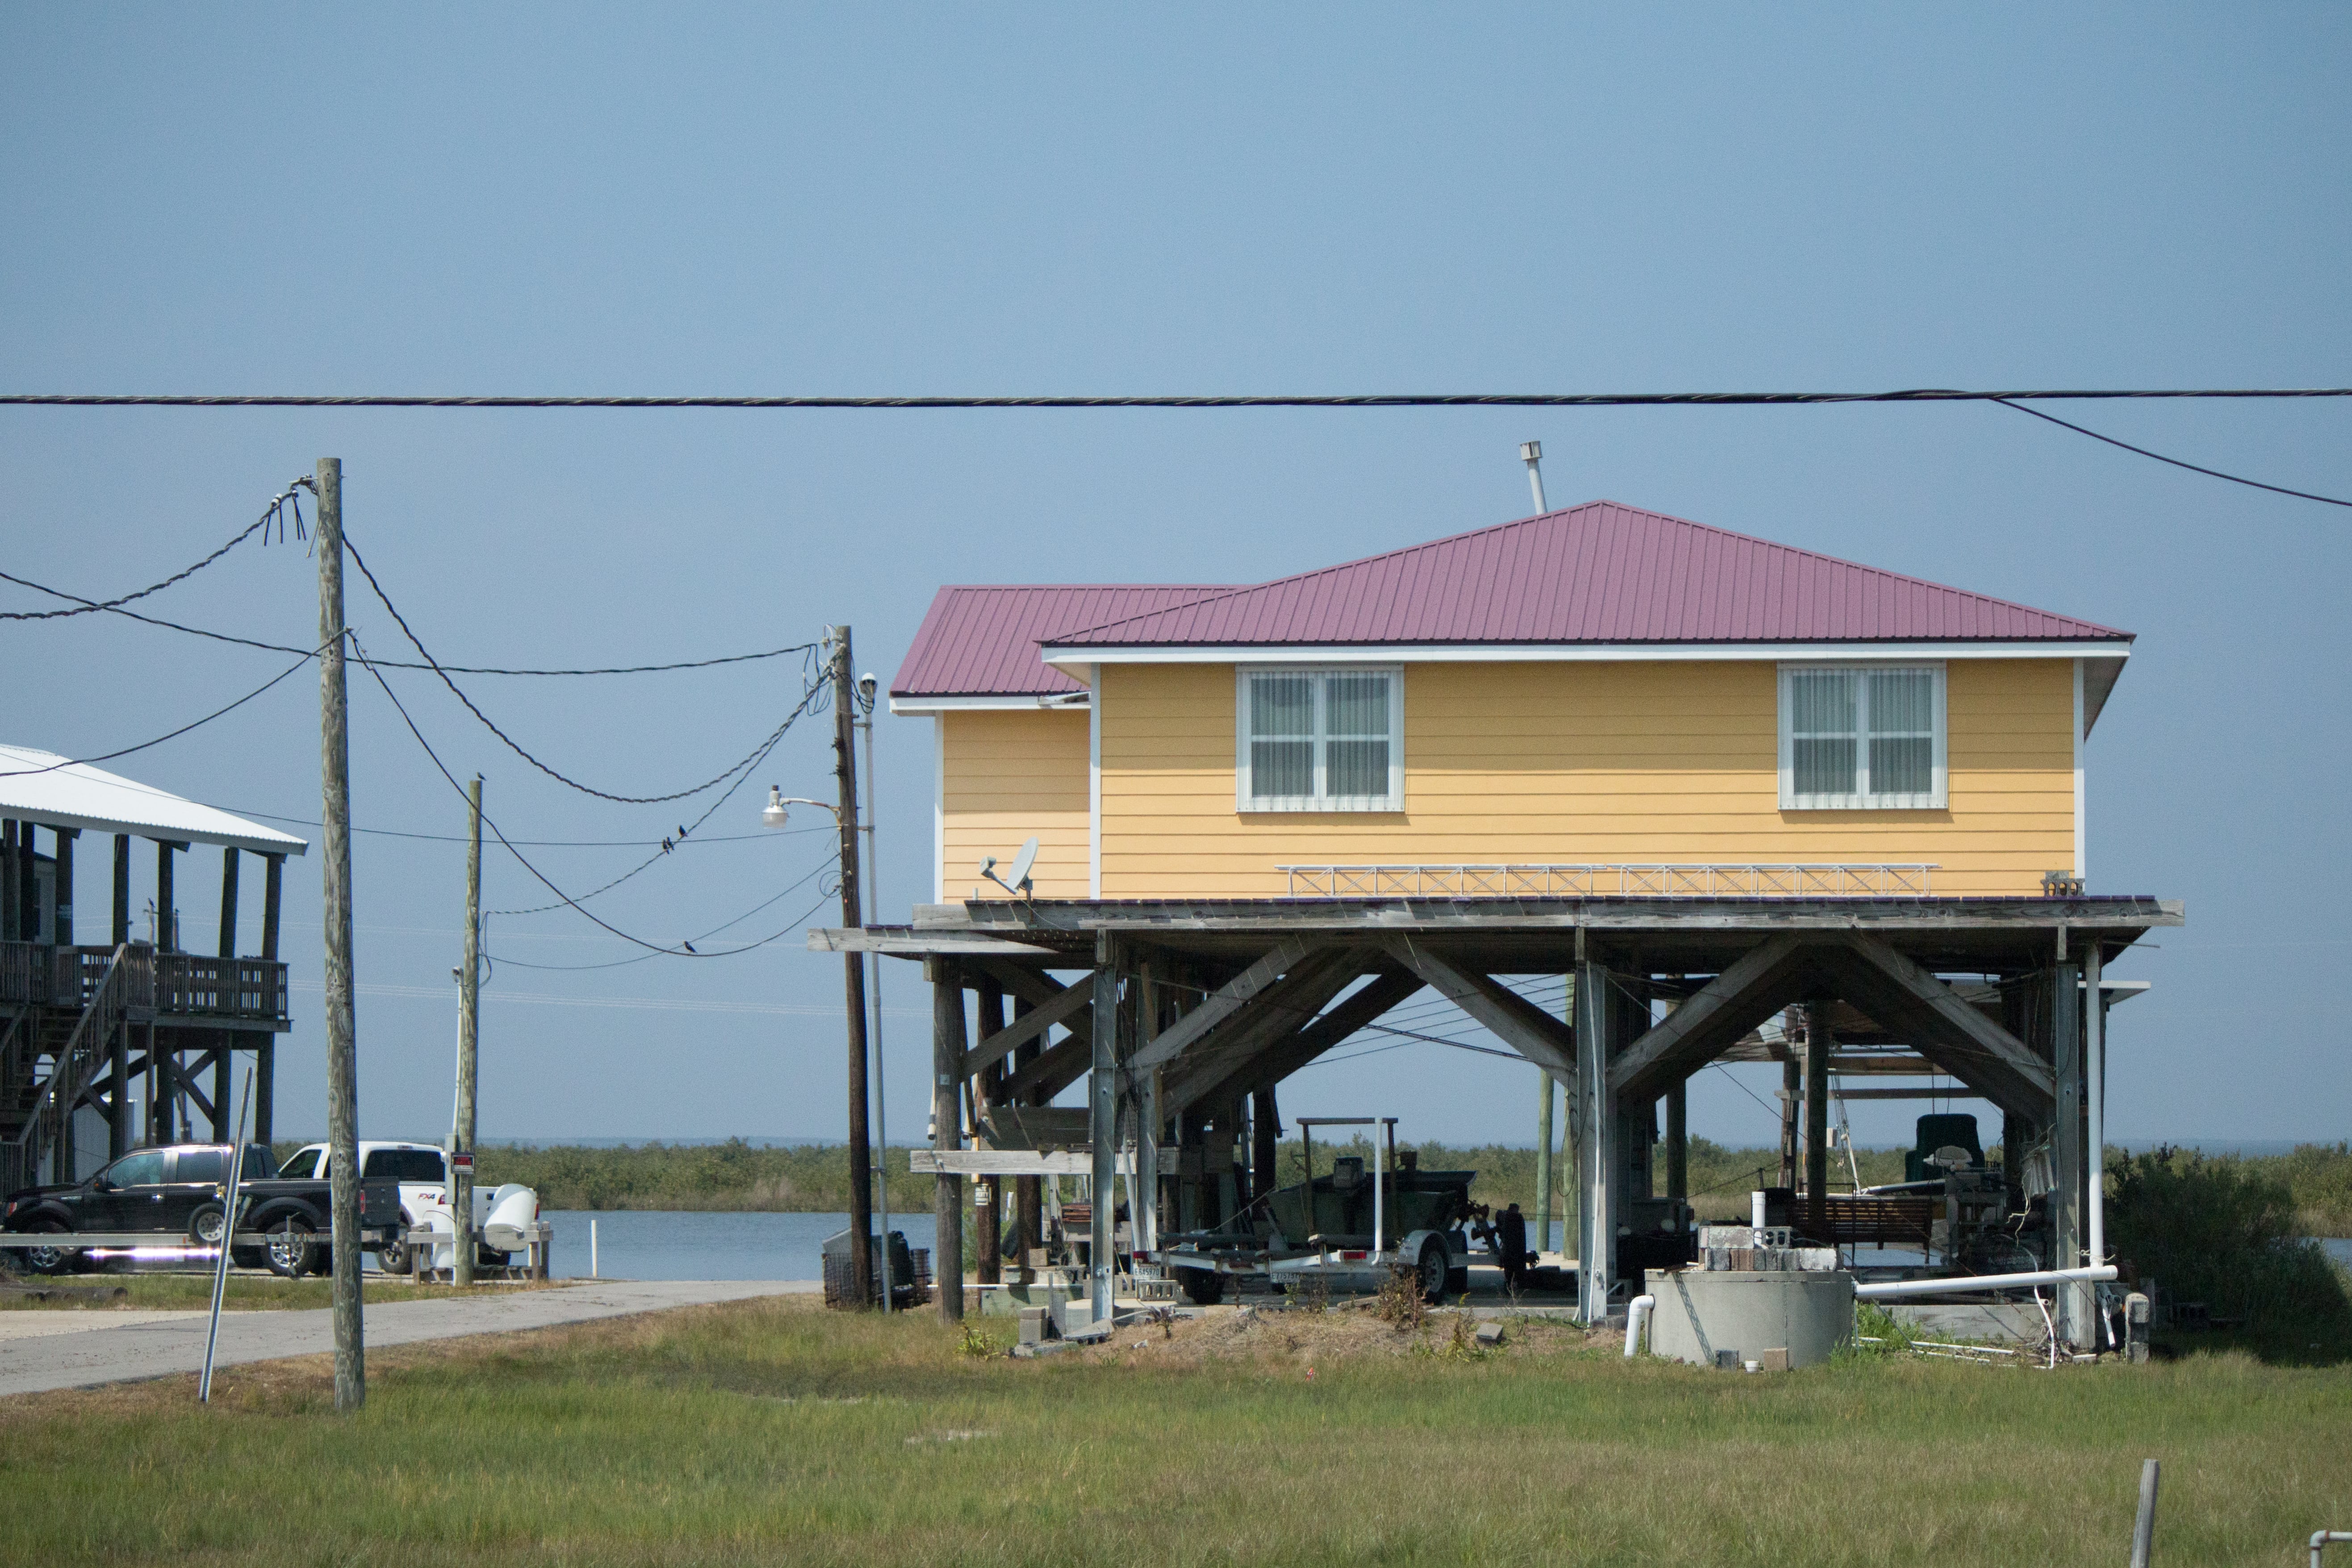 Most of the houses on Grand Isle are raised up on tall stilts to prevent flooding in the event of a hurricane. Grand Isle, a mecca for vacationers, is the only inhabited barrier island in Louisiana.